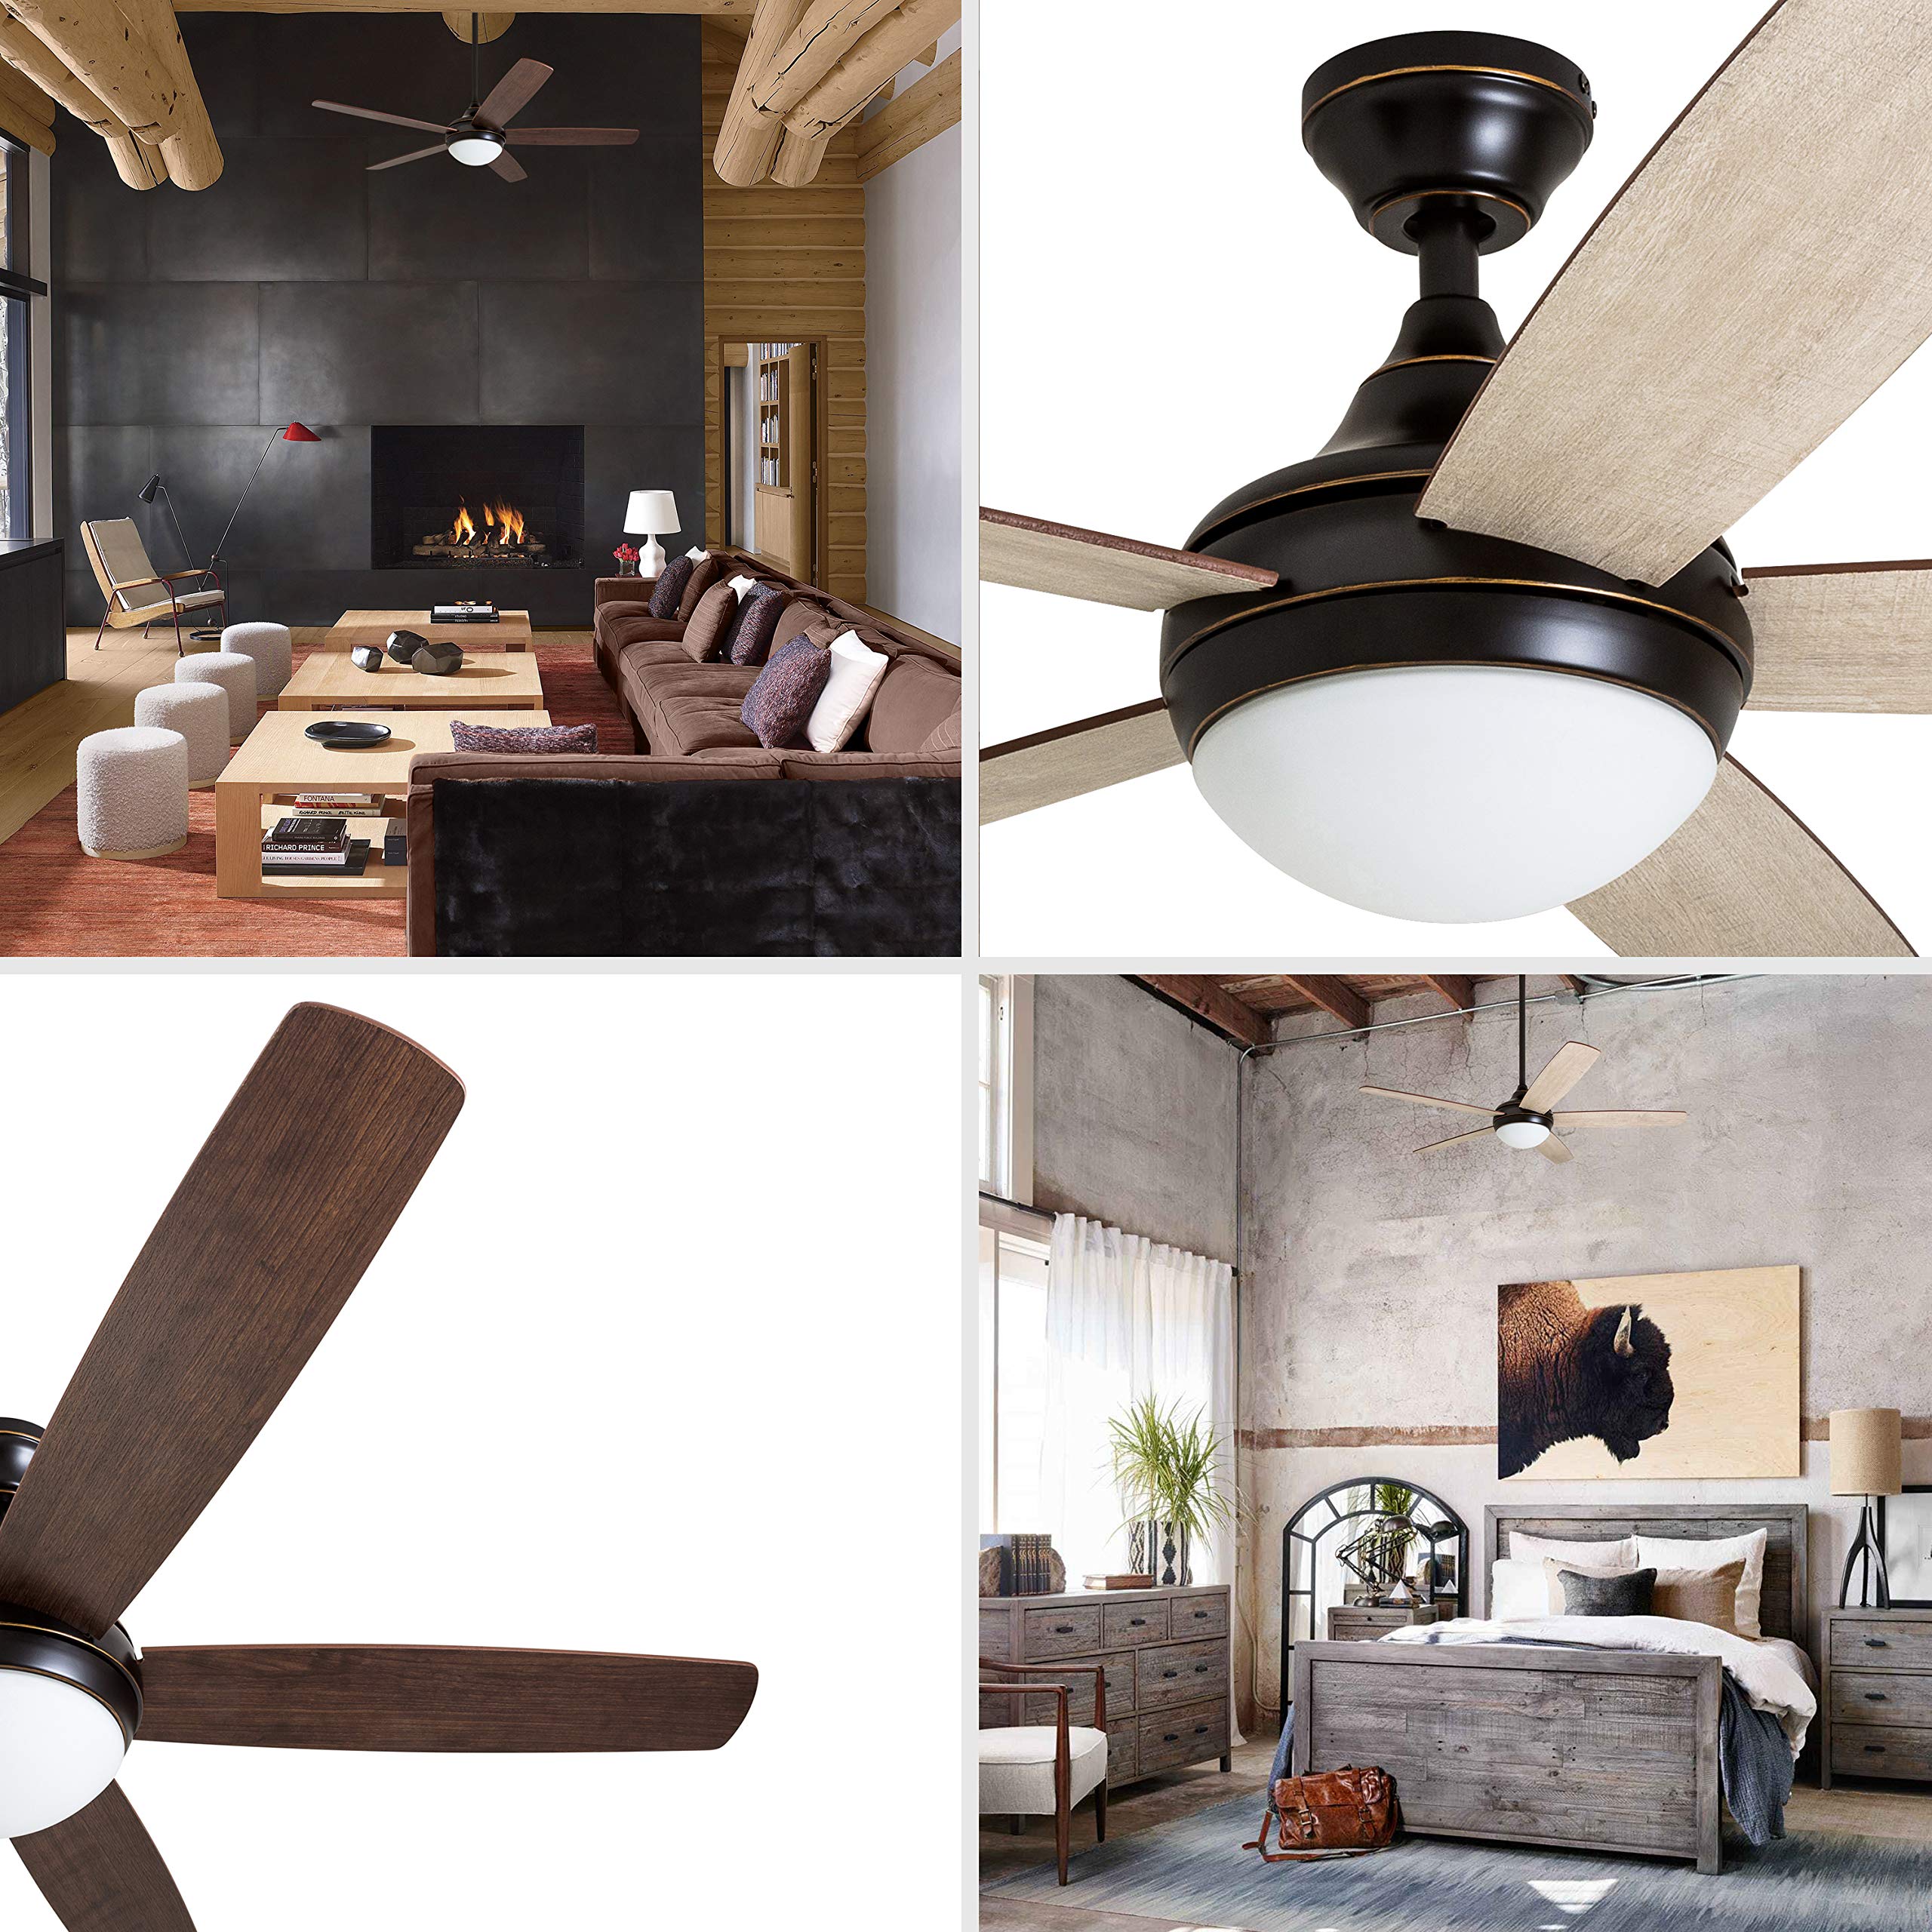 Prominence Home 80093-01 Ashby Ceiling Fan with Remote Control and Dimmable Integrated LED Light Frosted Fixture, 52